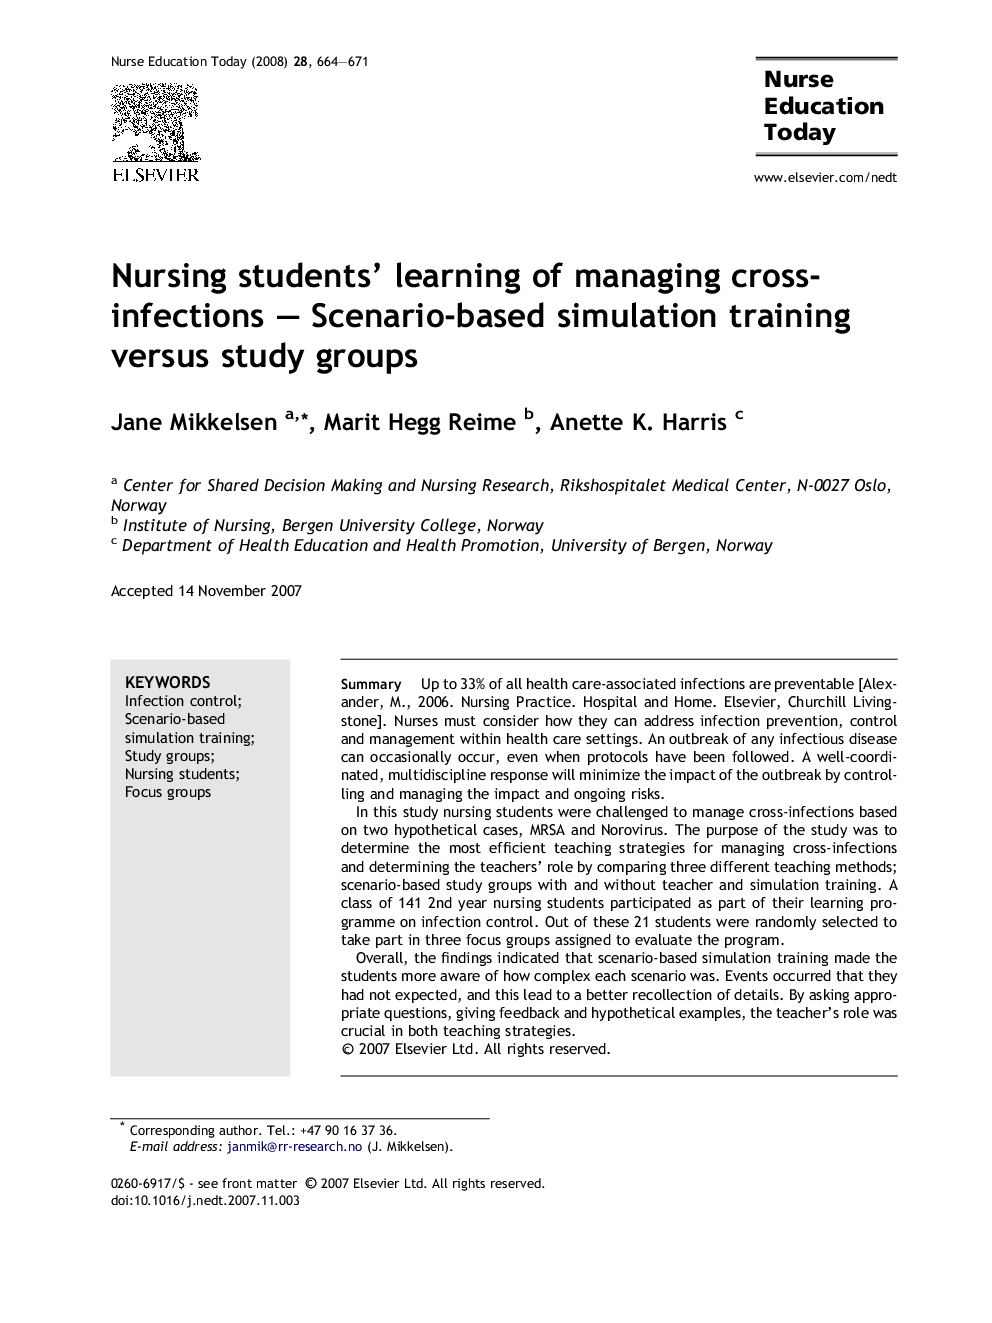 Nursing students’ learning of managing cross-infections – Scenario-based simulation training versus study groups